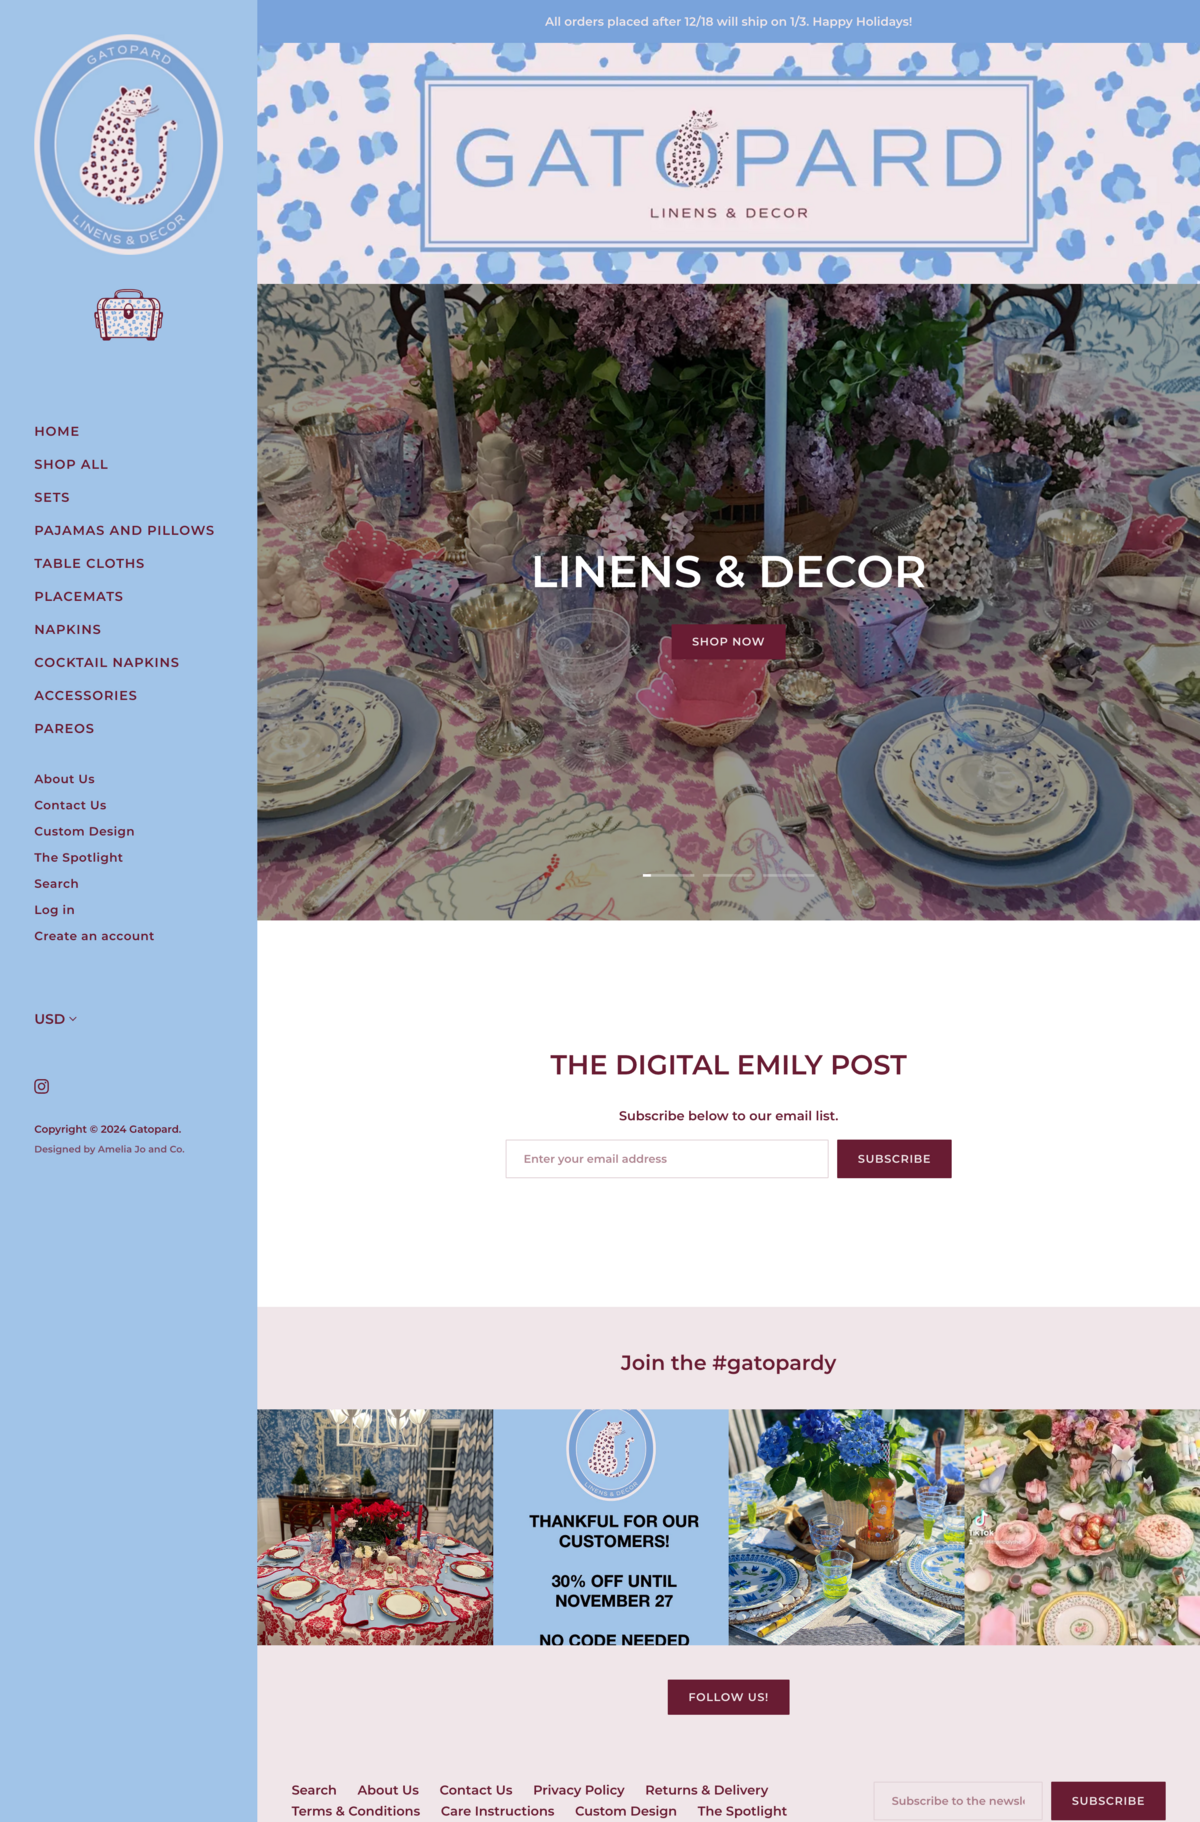 Homepage design for Gatopard Linens & Decor  featuring sidebar navigation, leaopard print header with logo on top